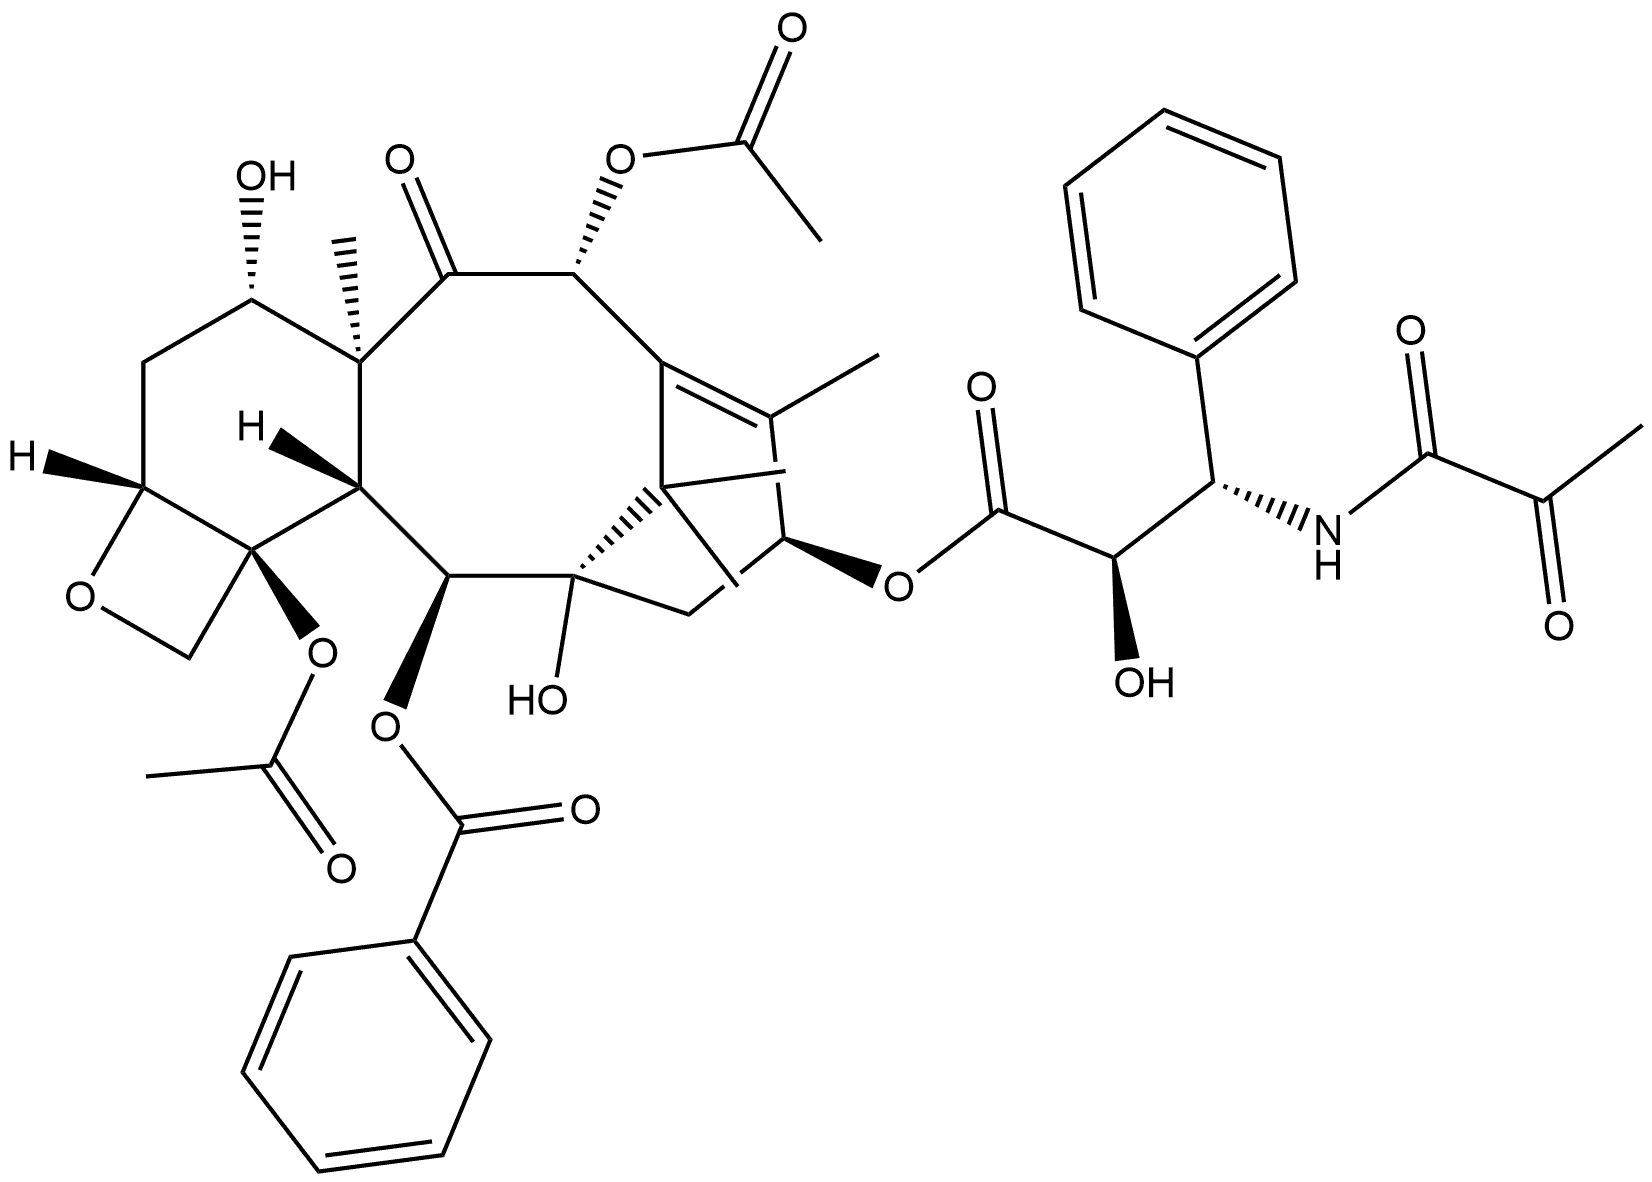 Benzenepropanoic acid, β-[(1,2-dioxopropyl)amino]-α-hydroxy-, (2aR,4S,4aS,6R,9S,11S,12S,12aR,12bS)-6,12b-bis(acetyloxy)-12-(benzoyloxy)-2a,3,4,4a,5,6,9,10,11,12,12a,12b-dodecahydro-4,11-dihydroxy-4a,8,13,13-tetramethyl-5-oxo-7,11-methano-1H-cyclodeca[3,4]benz[1,2-b]oxet-9-yl ester, (αR,βS)- Structure